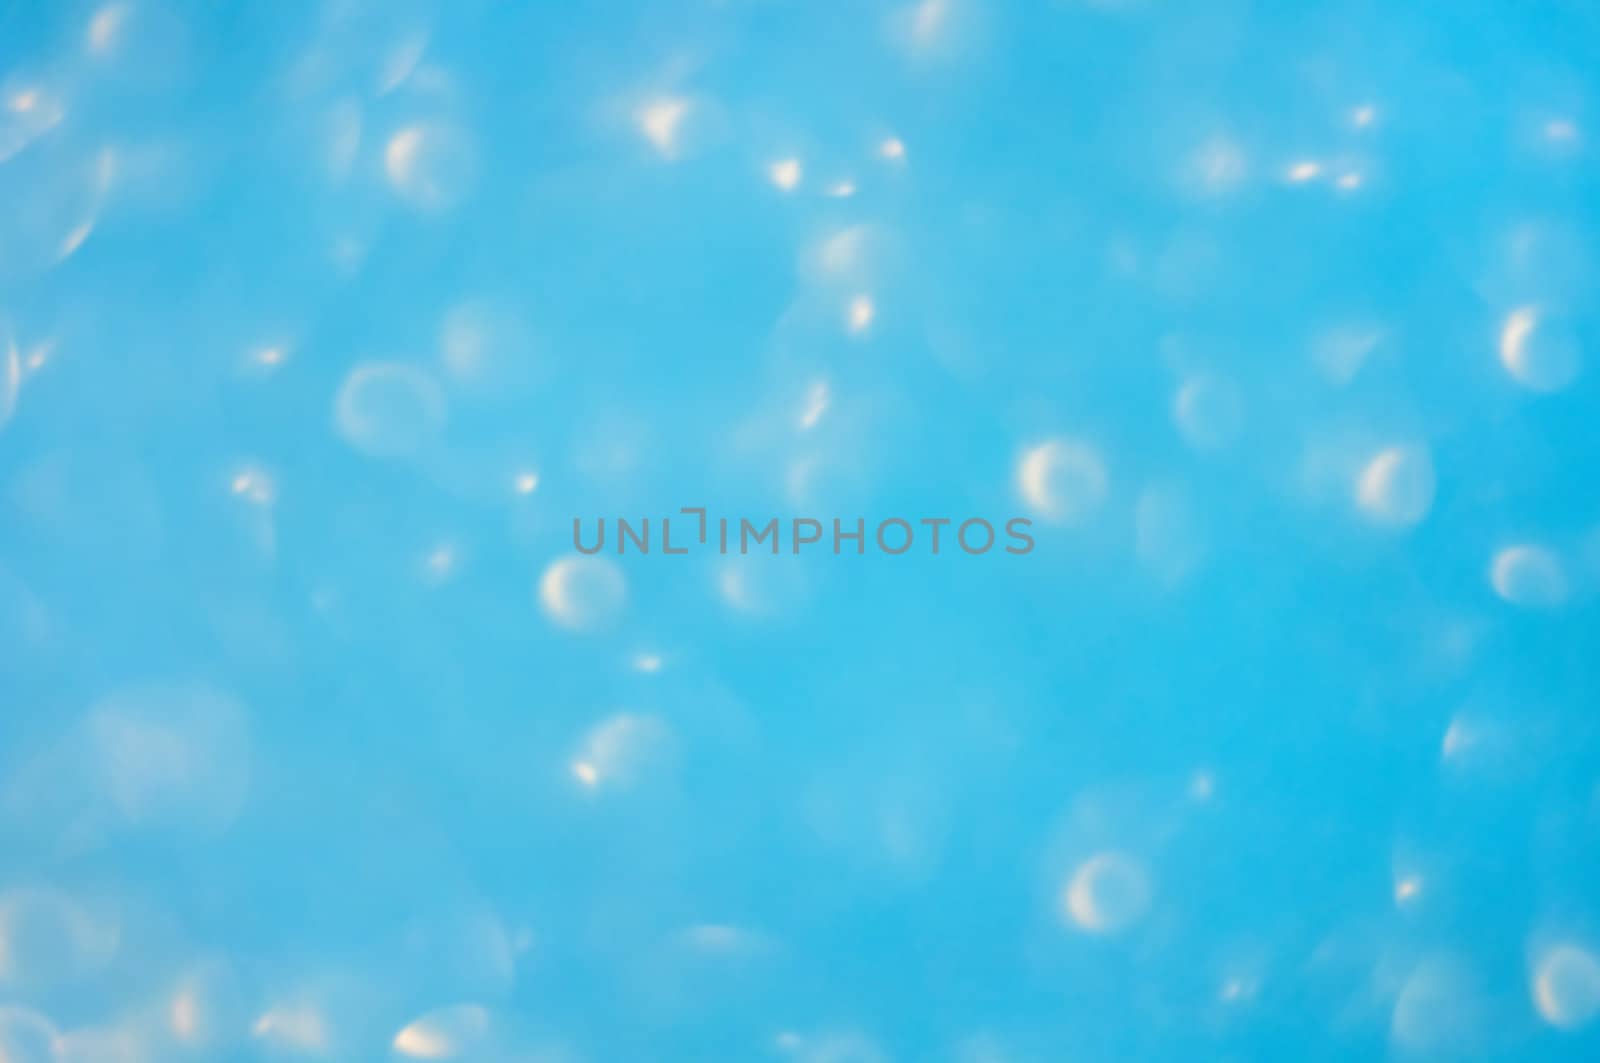 A soft photographed bokeh background in light blue with white lights creating an underwater bubble effect.